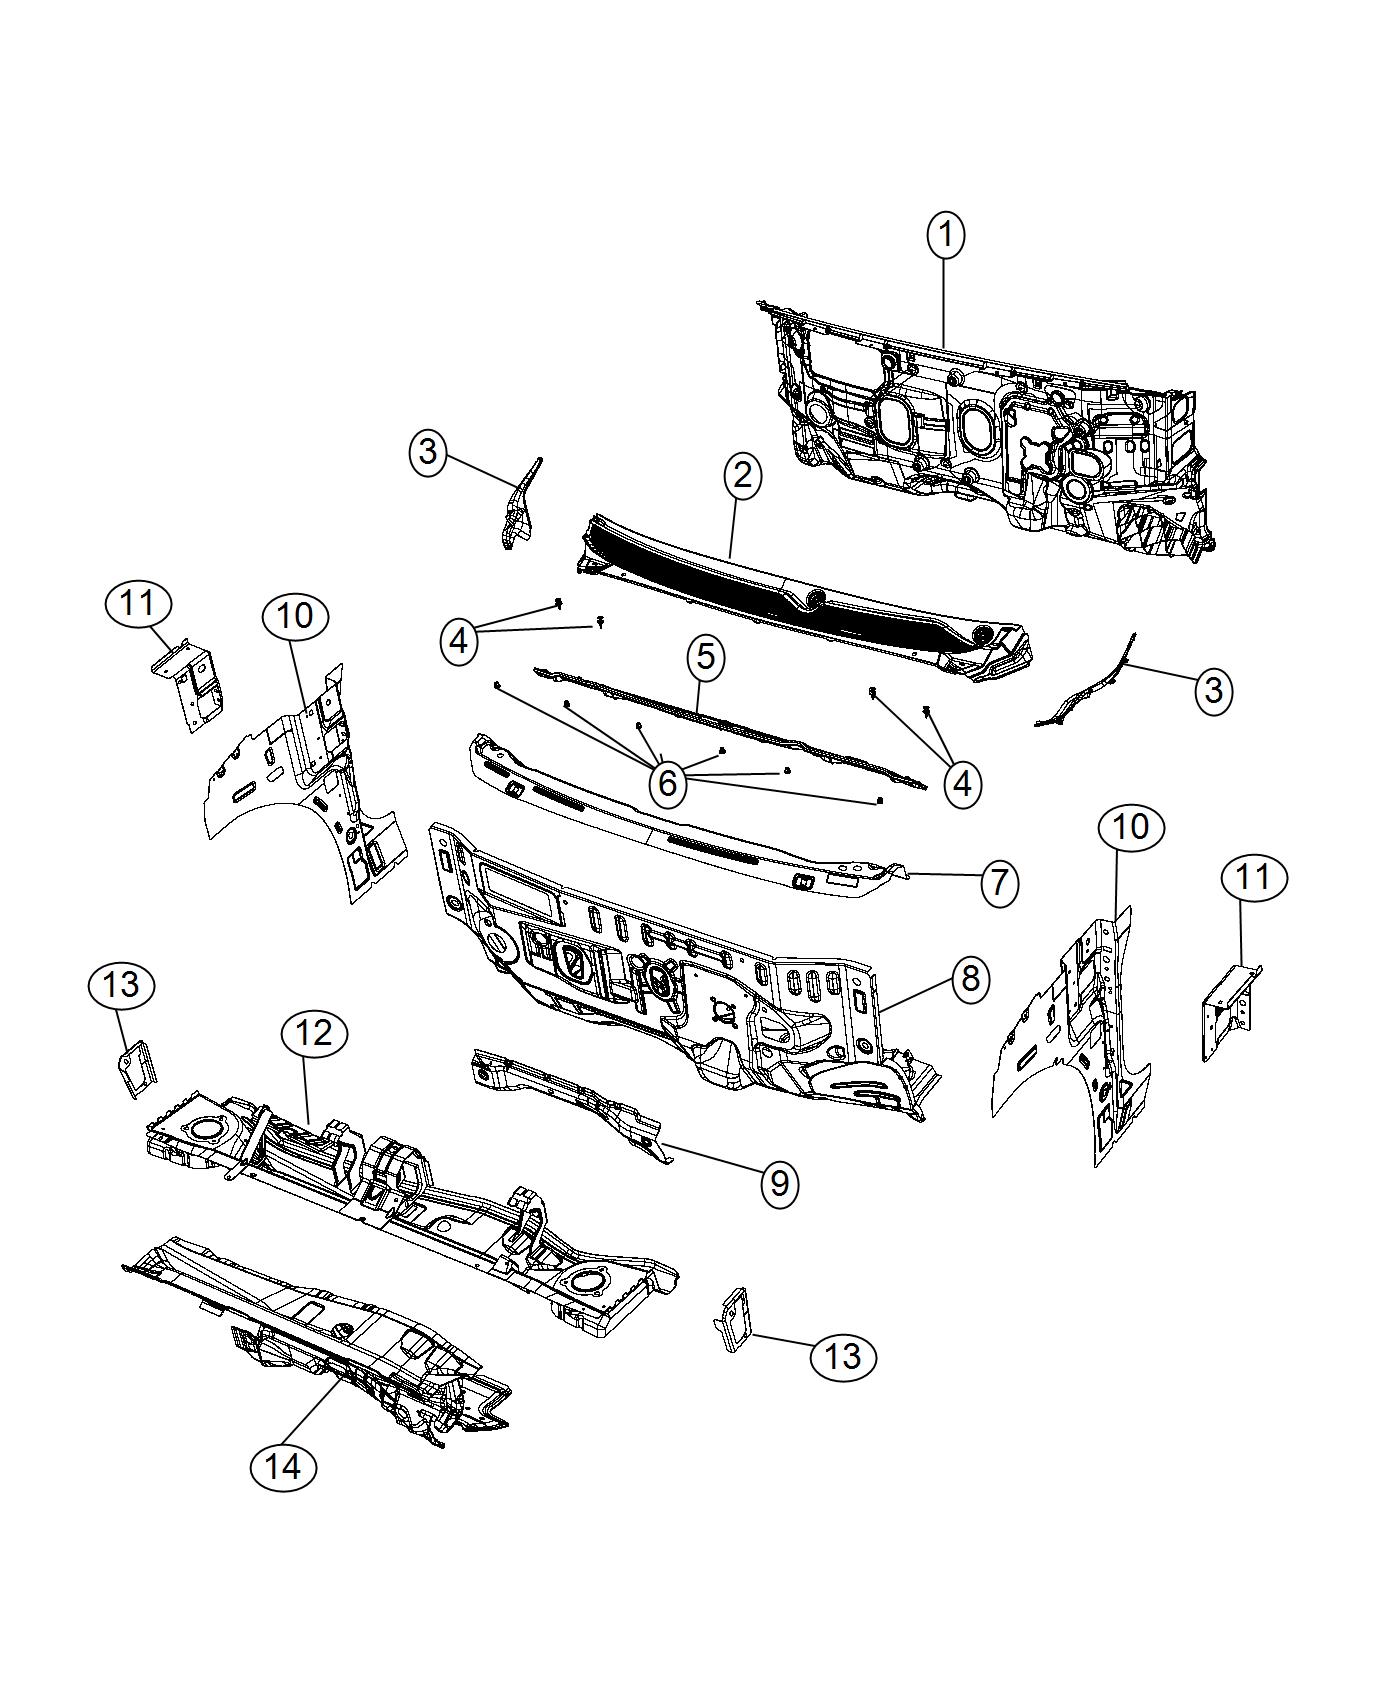 Cowl , Dash Panel and Related Parts. Diagram